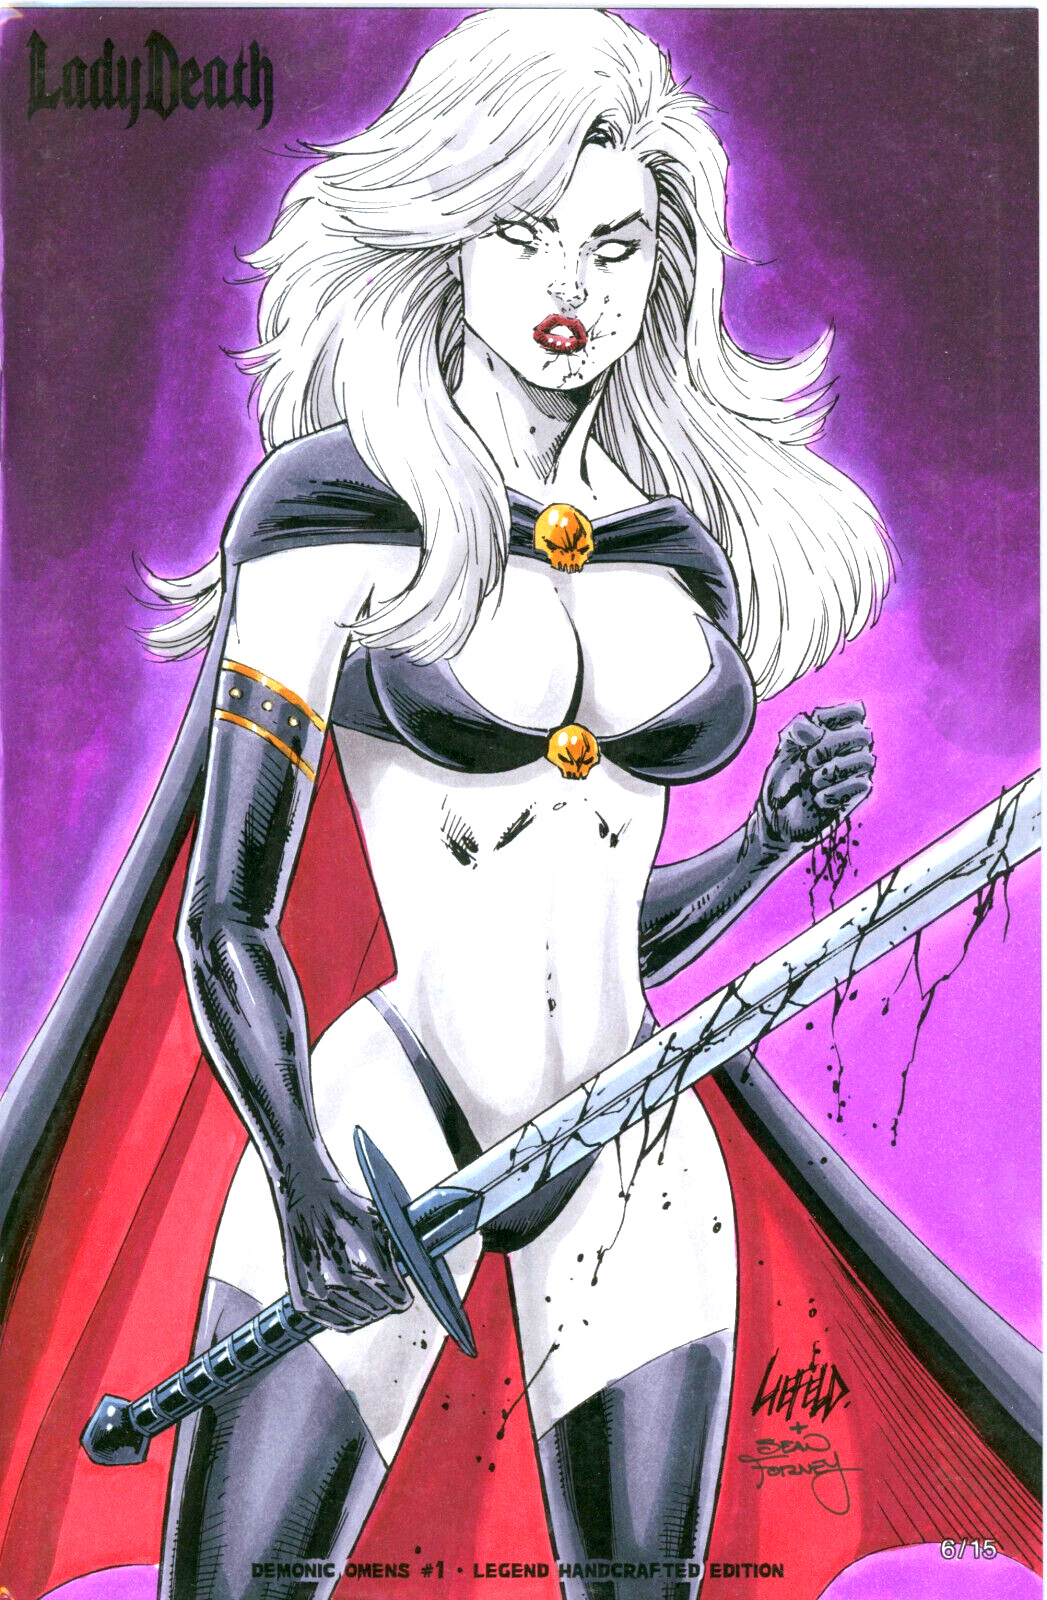 Lady Death Demonic Omens #1 Liefeld Handcrafted Legend Ed. Coffin Ltd /15